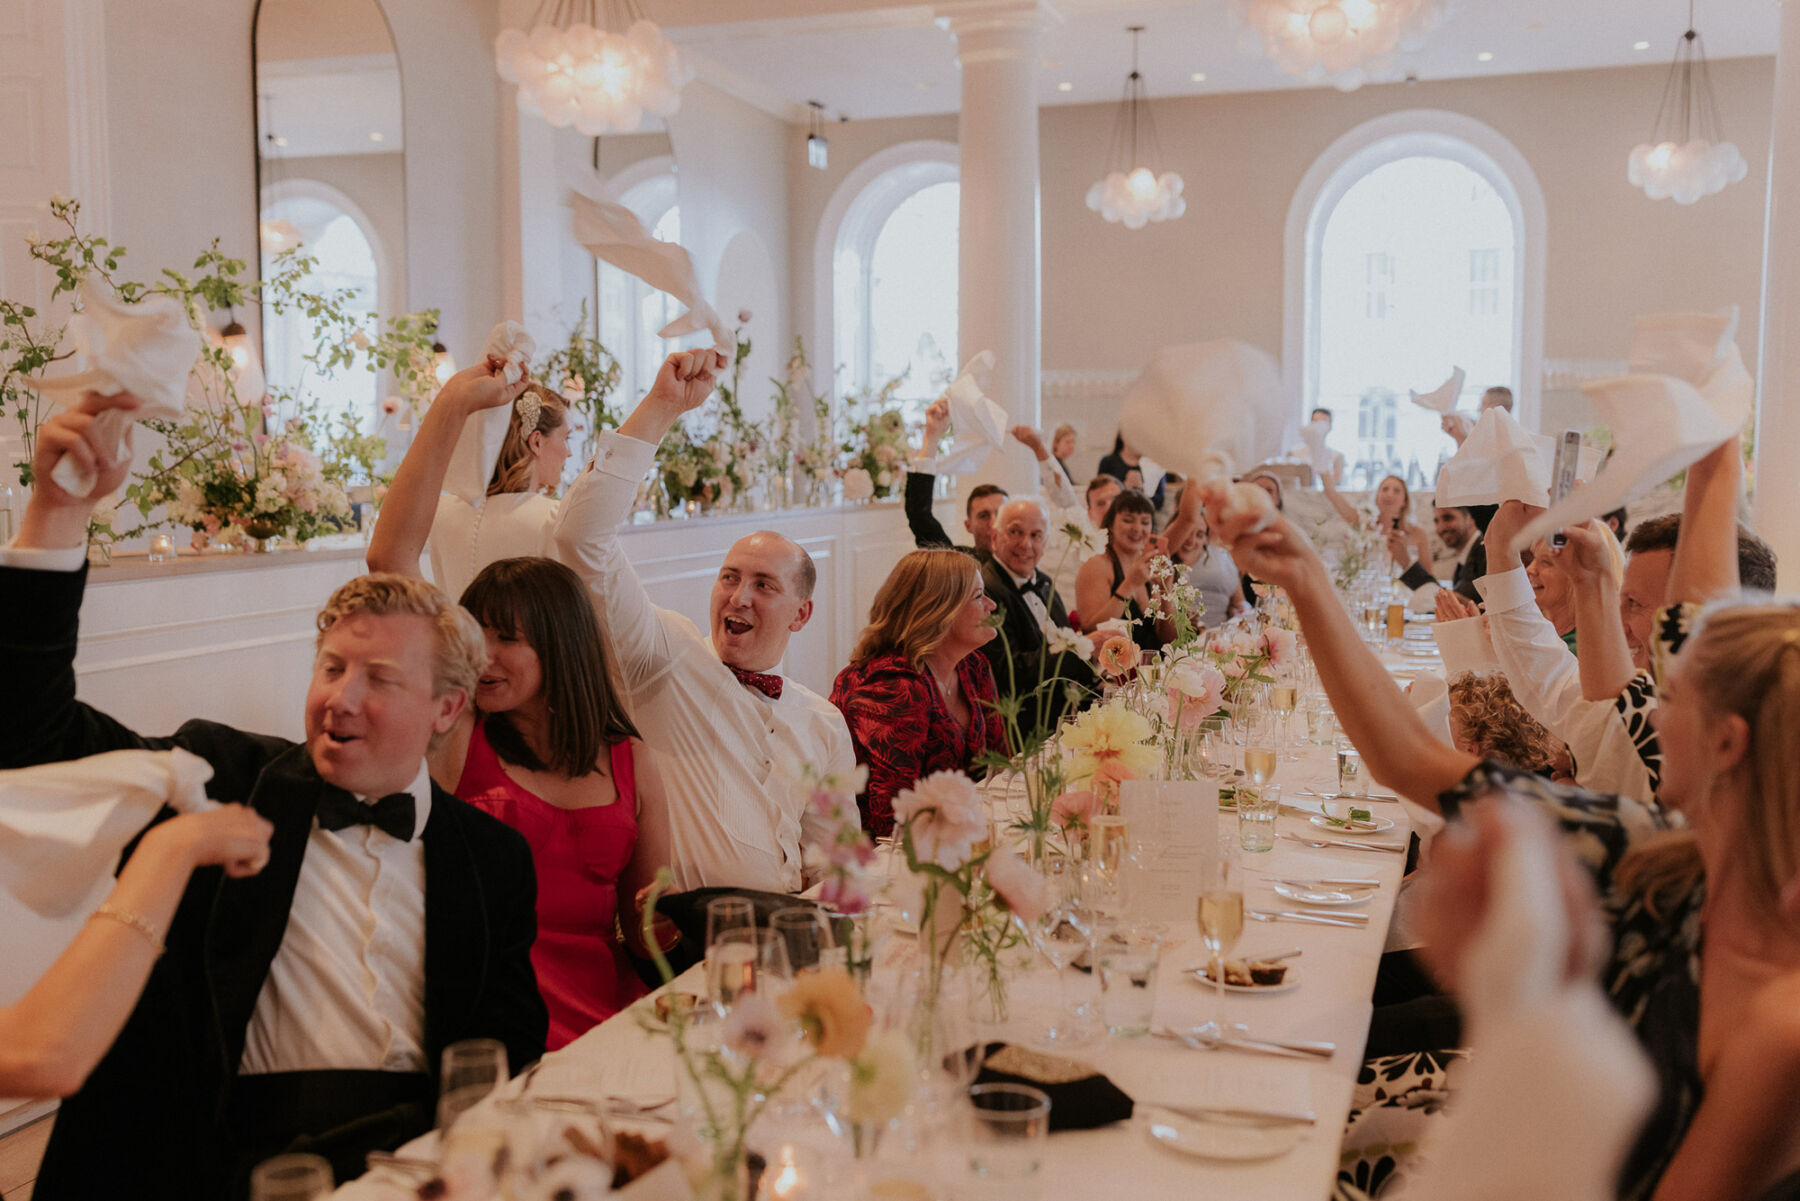 Guests waving napkins at wedding reception at Spring restaurant, London. Elegant flowers in bud vases on the table. Maja Tsolo Photography.